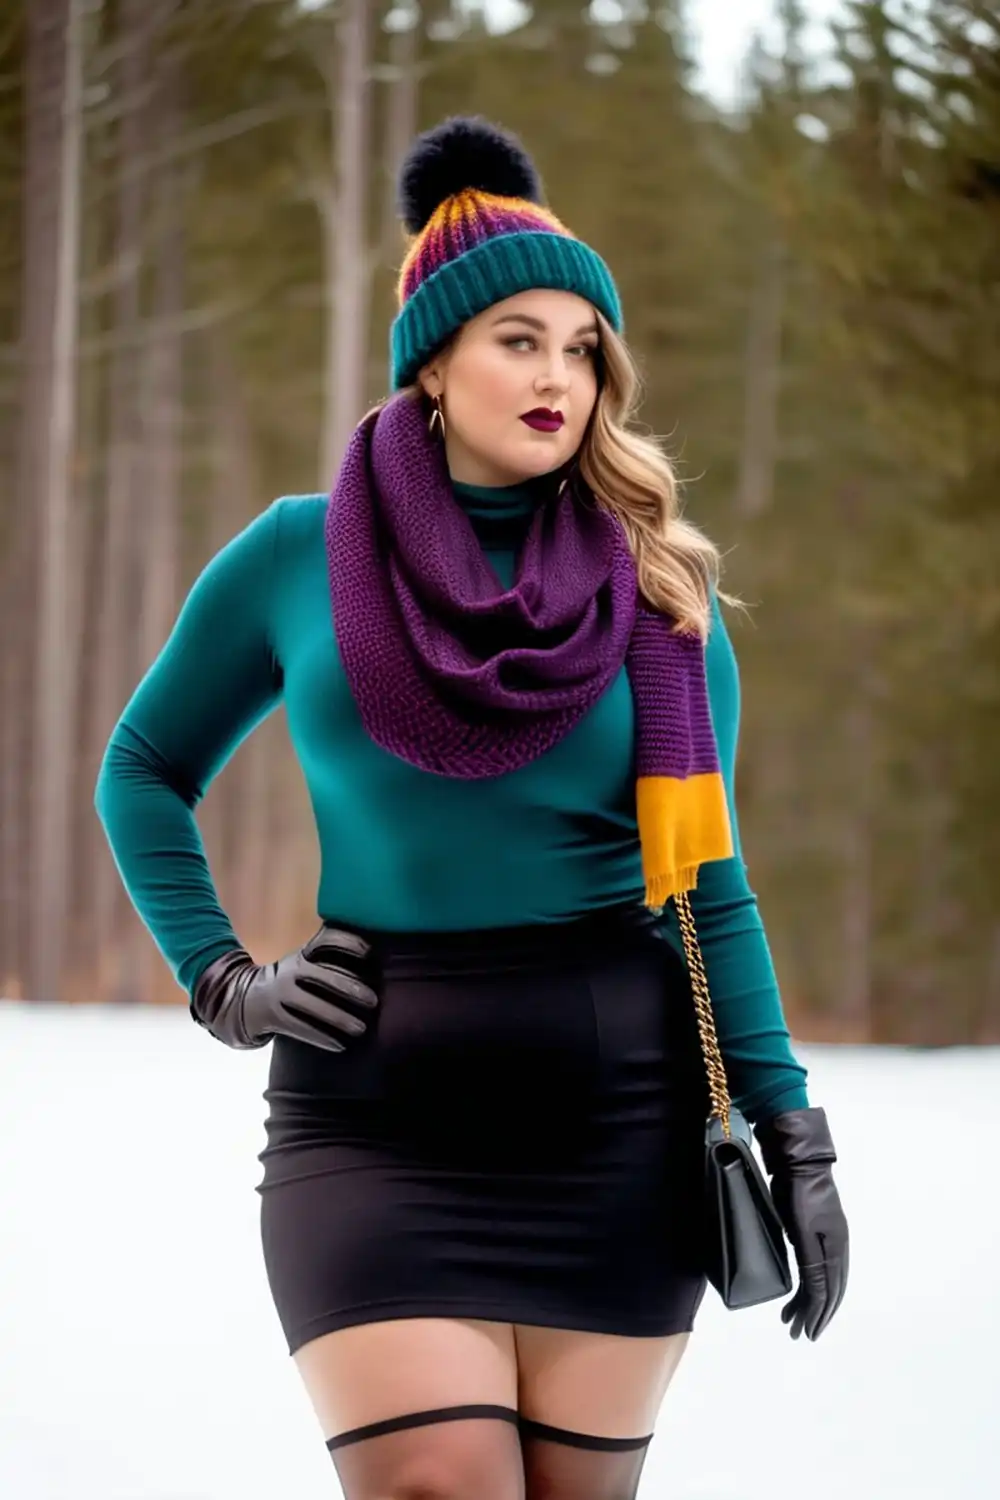 Girl wearing a tight skirt with scarves and gloves in winter